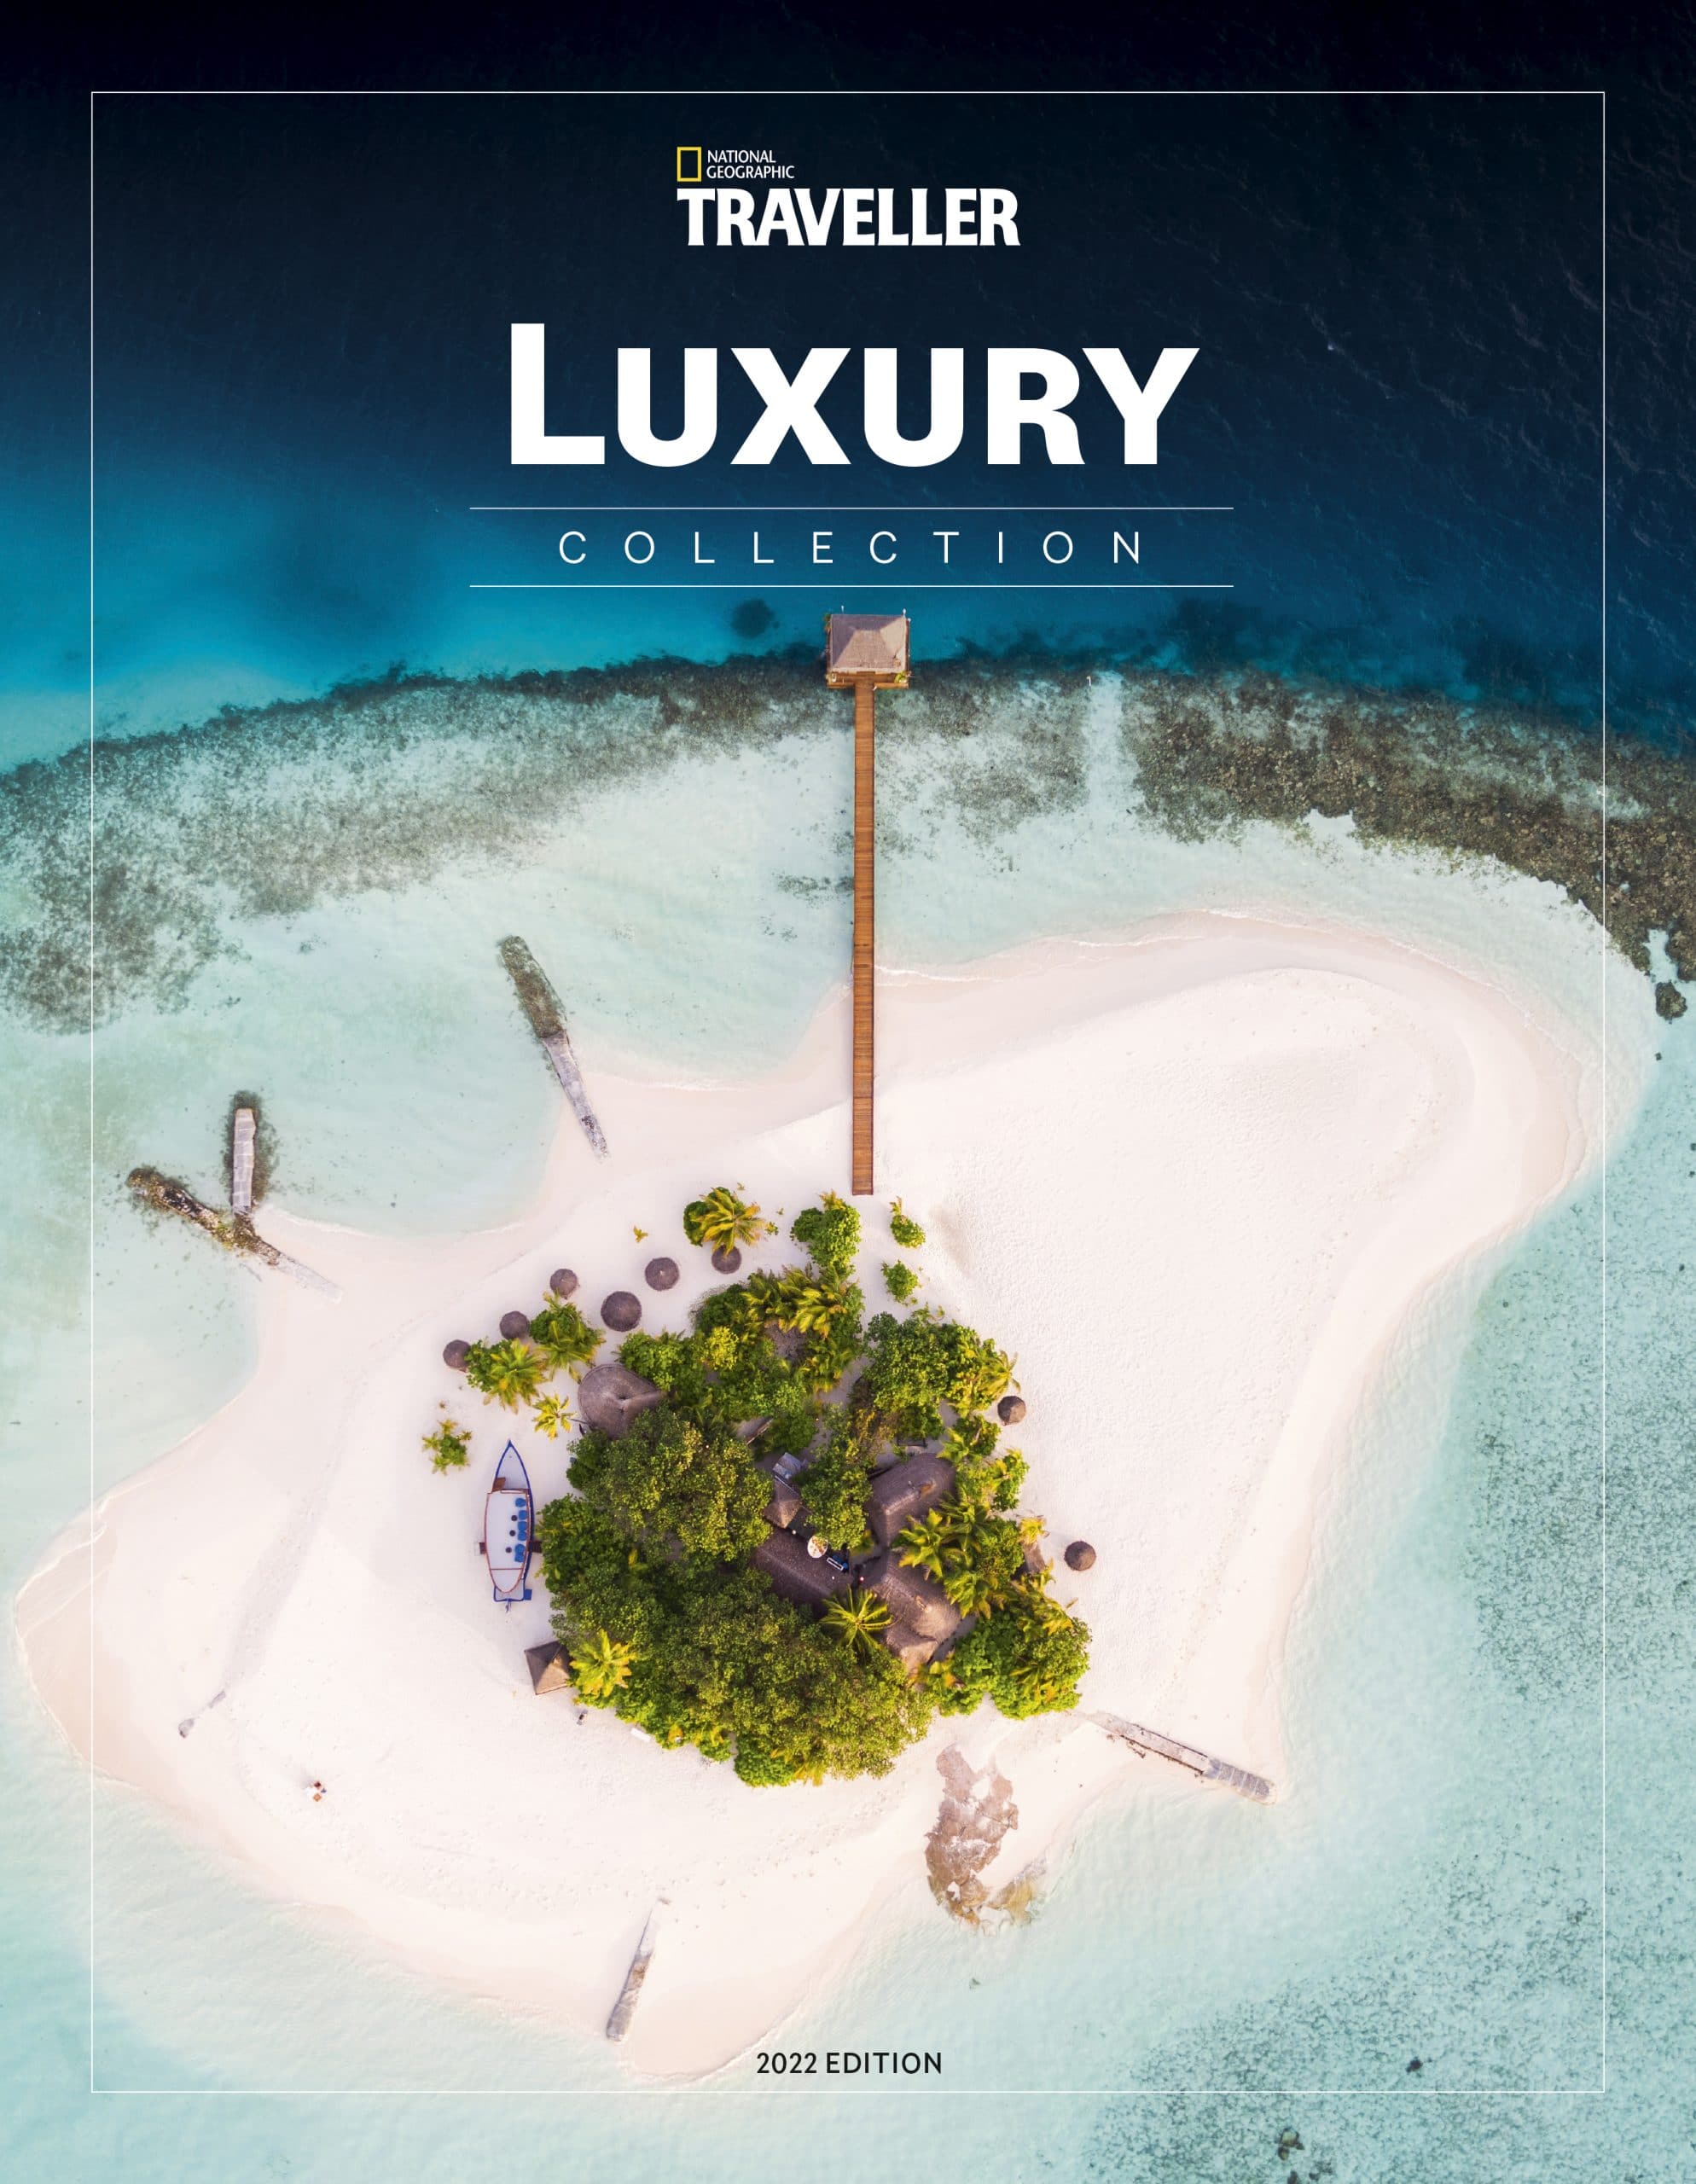 The Luxury Collection 2021 by National Geographic Traveller (UK).